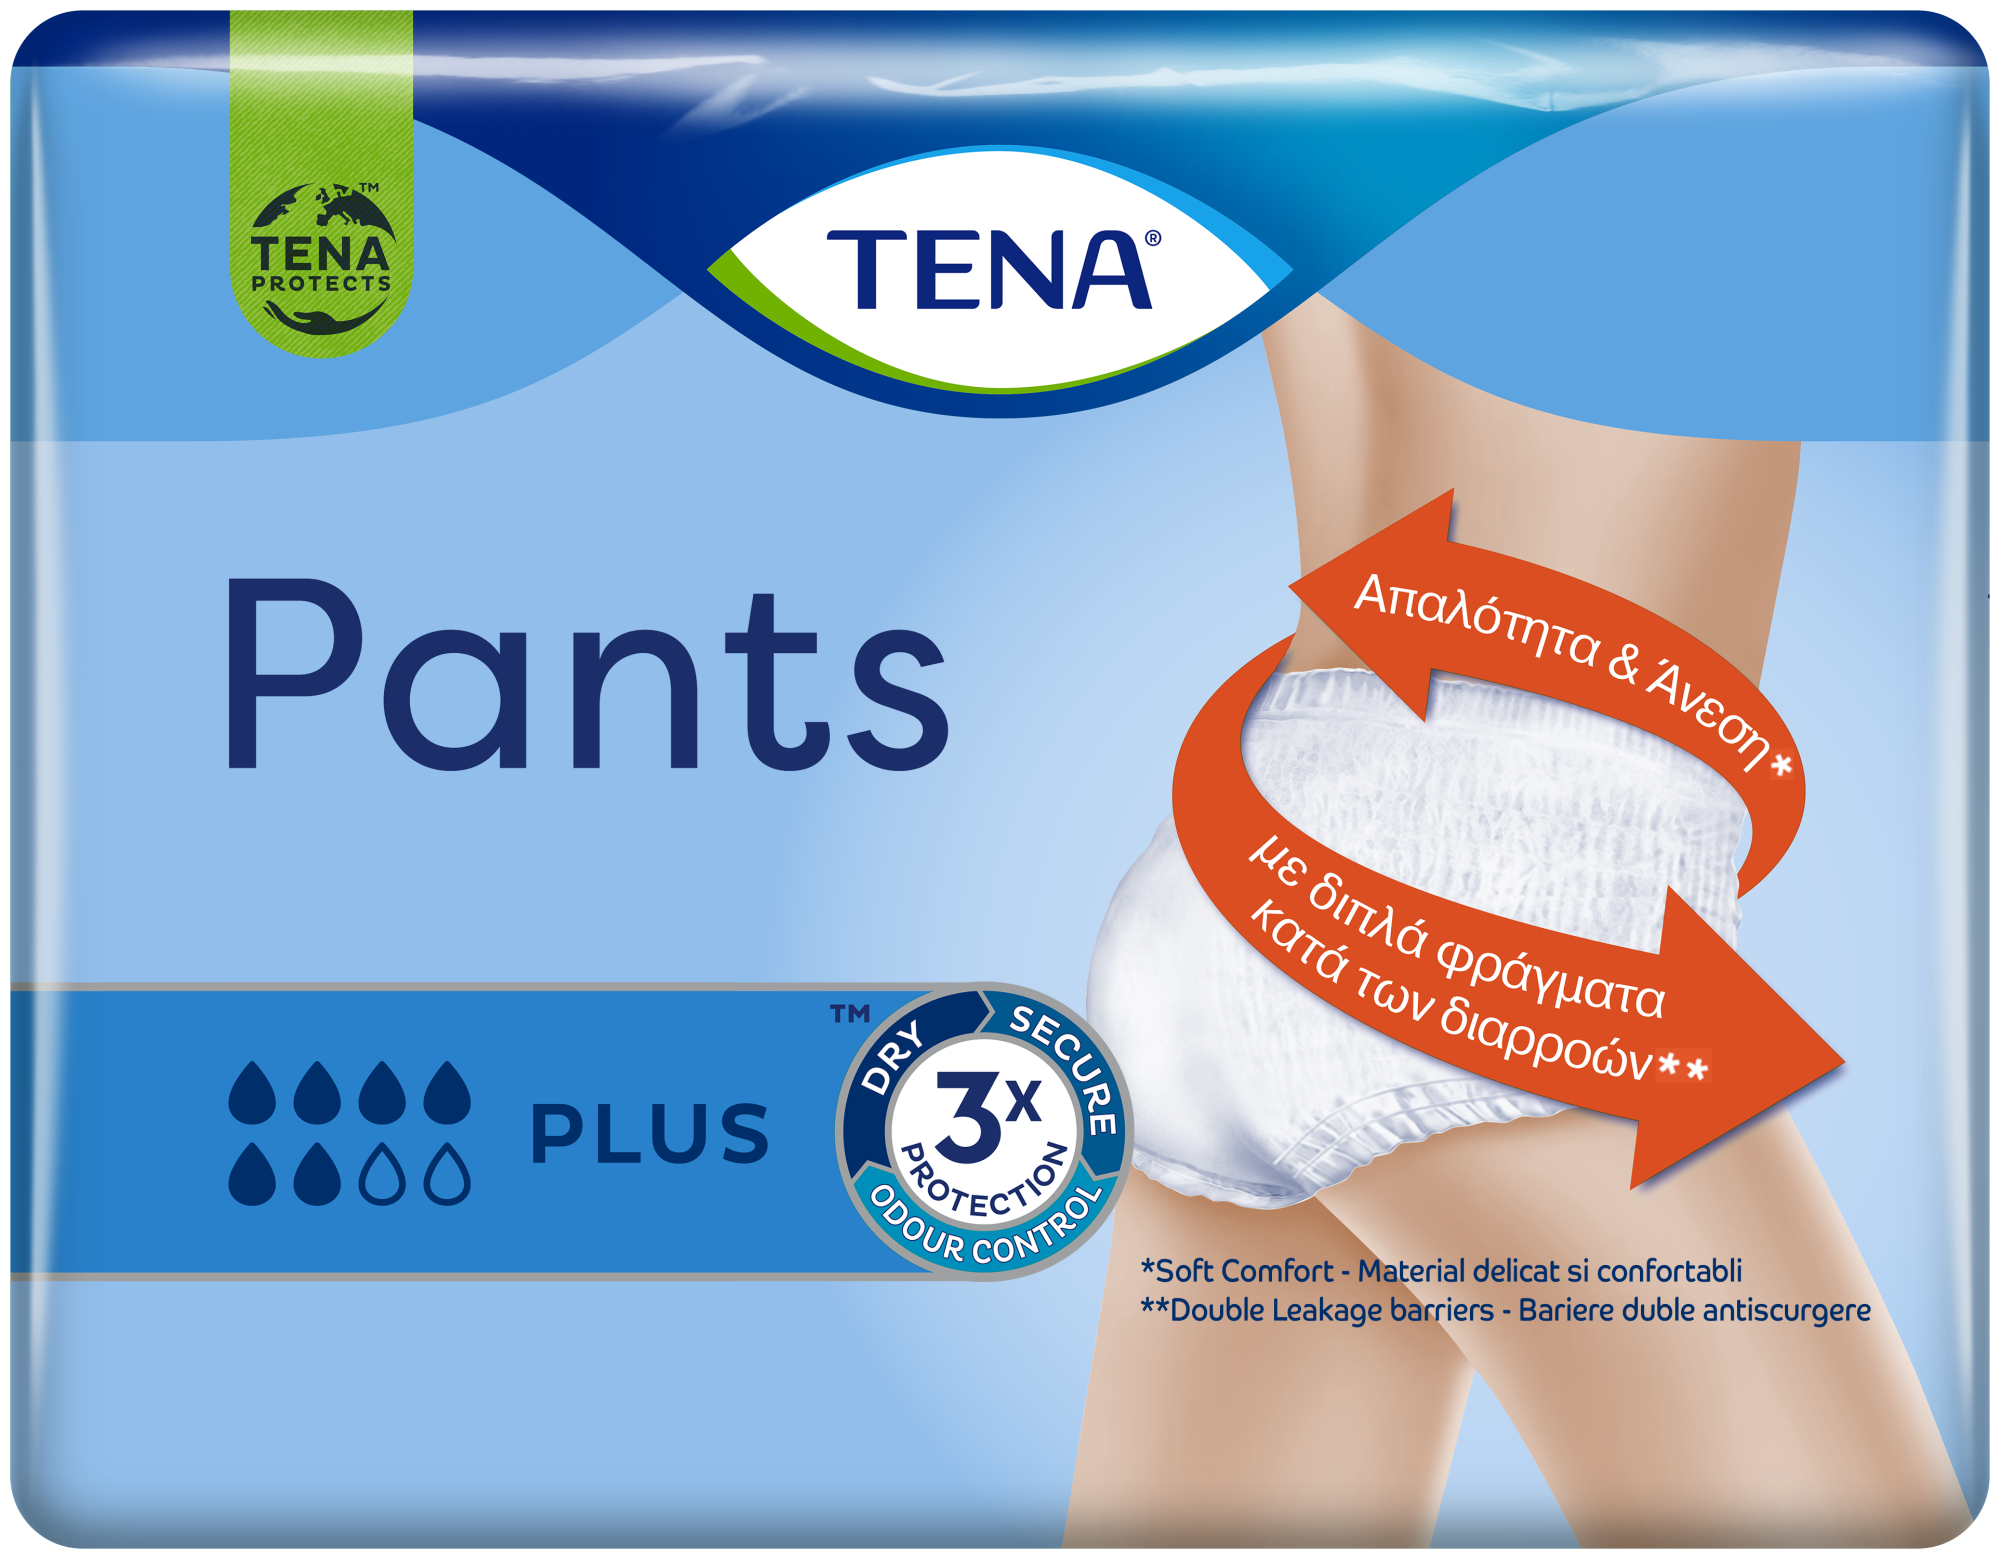 TENA Pants Plus soft pull-up incontinence pants for men and women